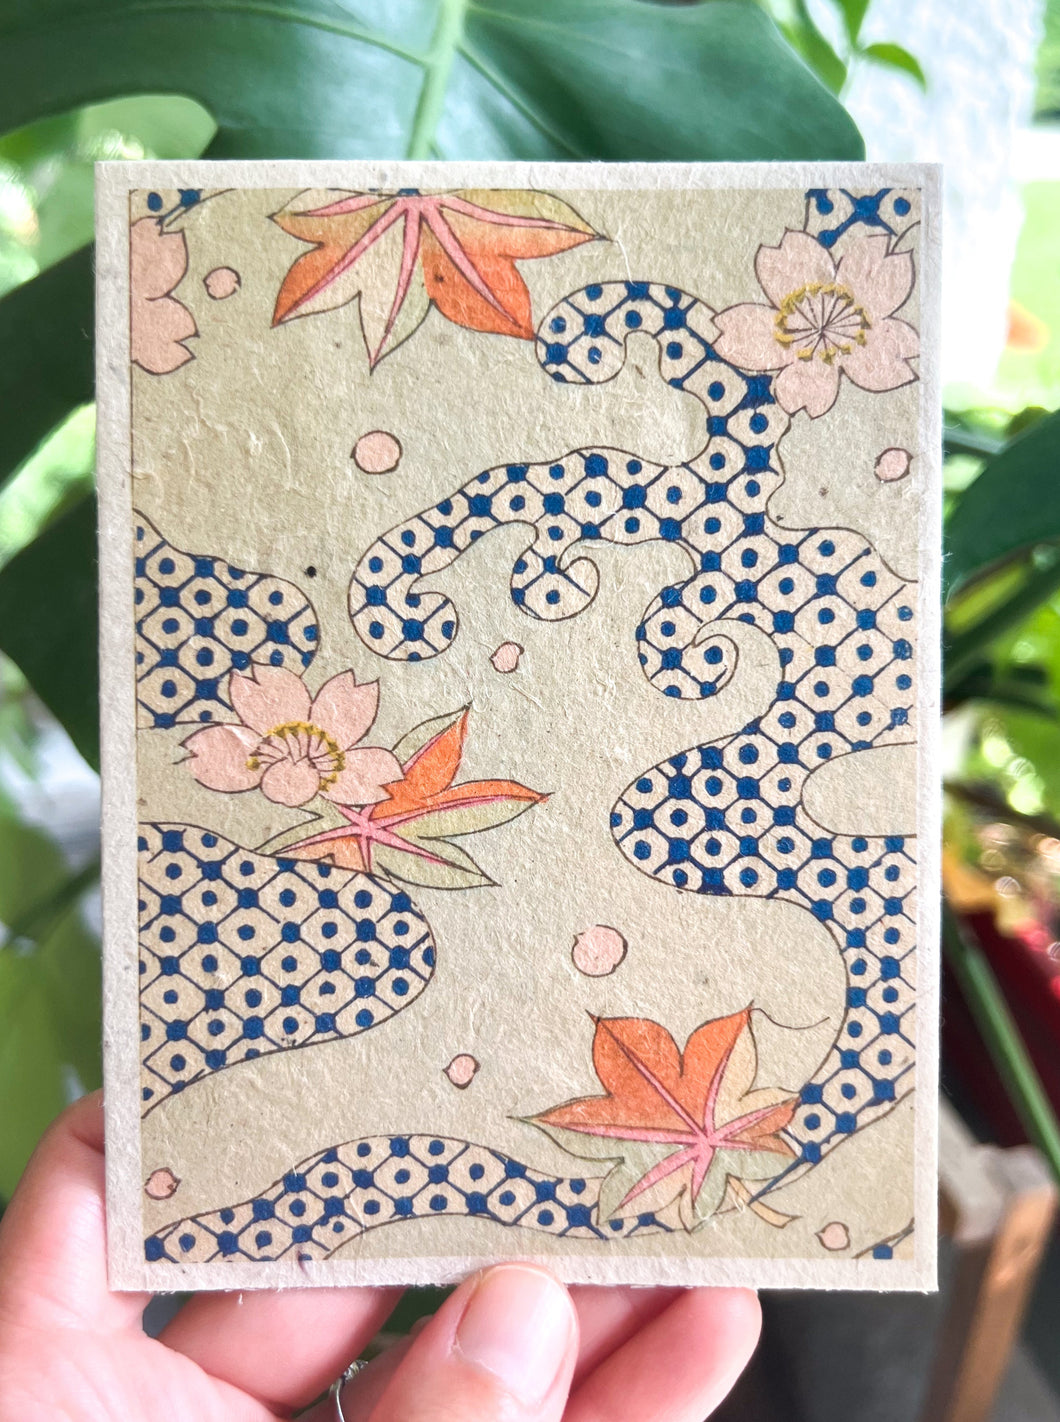 Japanese Plantable Seed Card || Zero Waste || Supports Women || Eco-friendly || J20